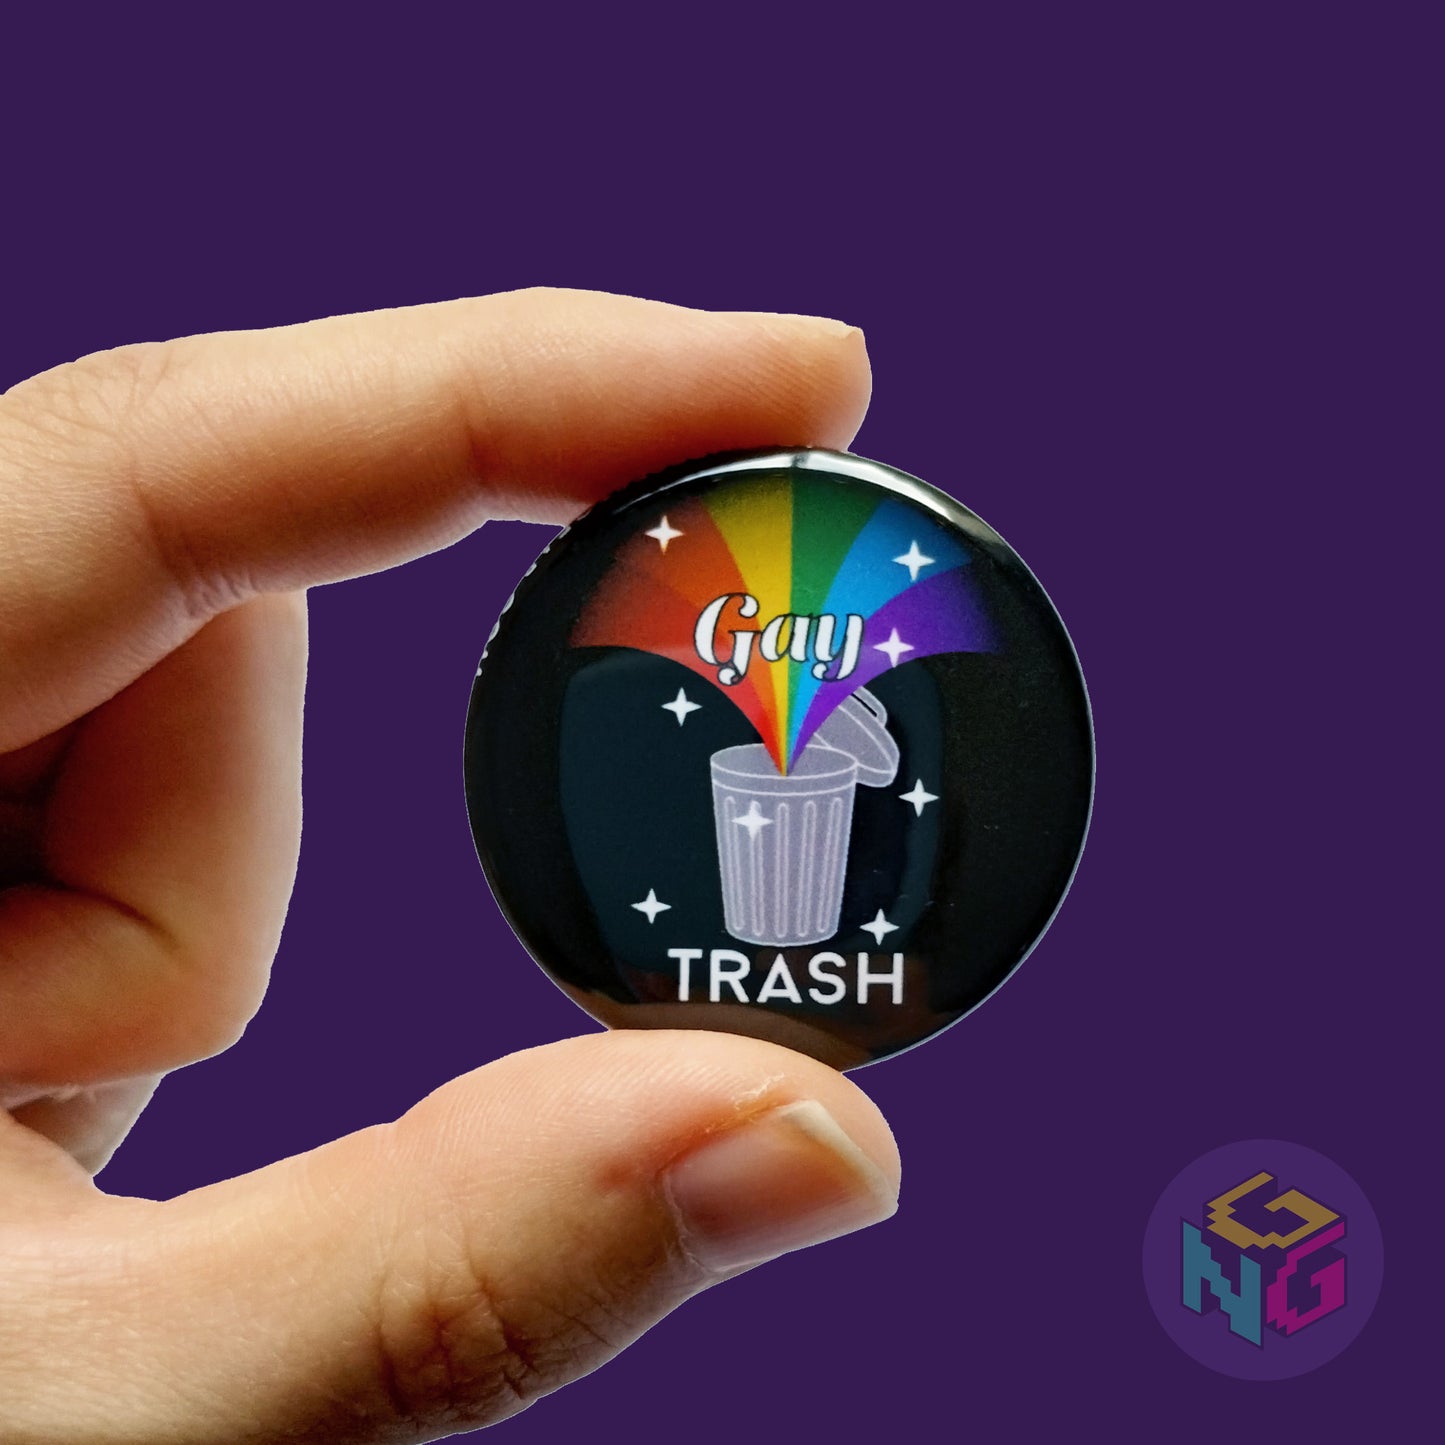 gay trash button held in hand in front of dark purple background